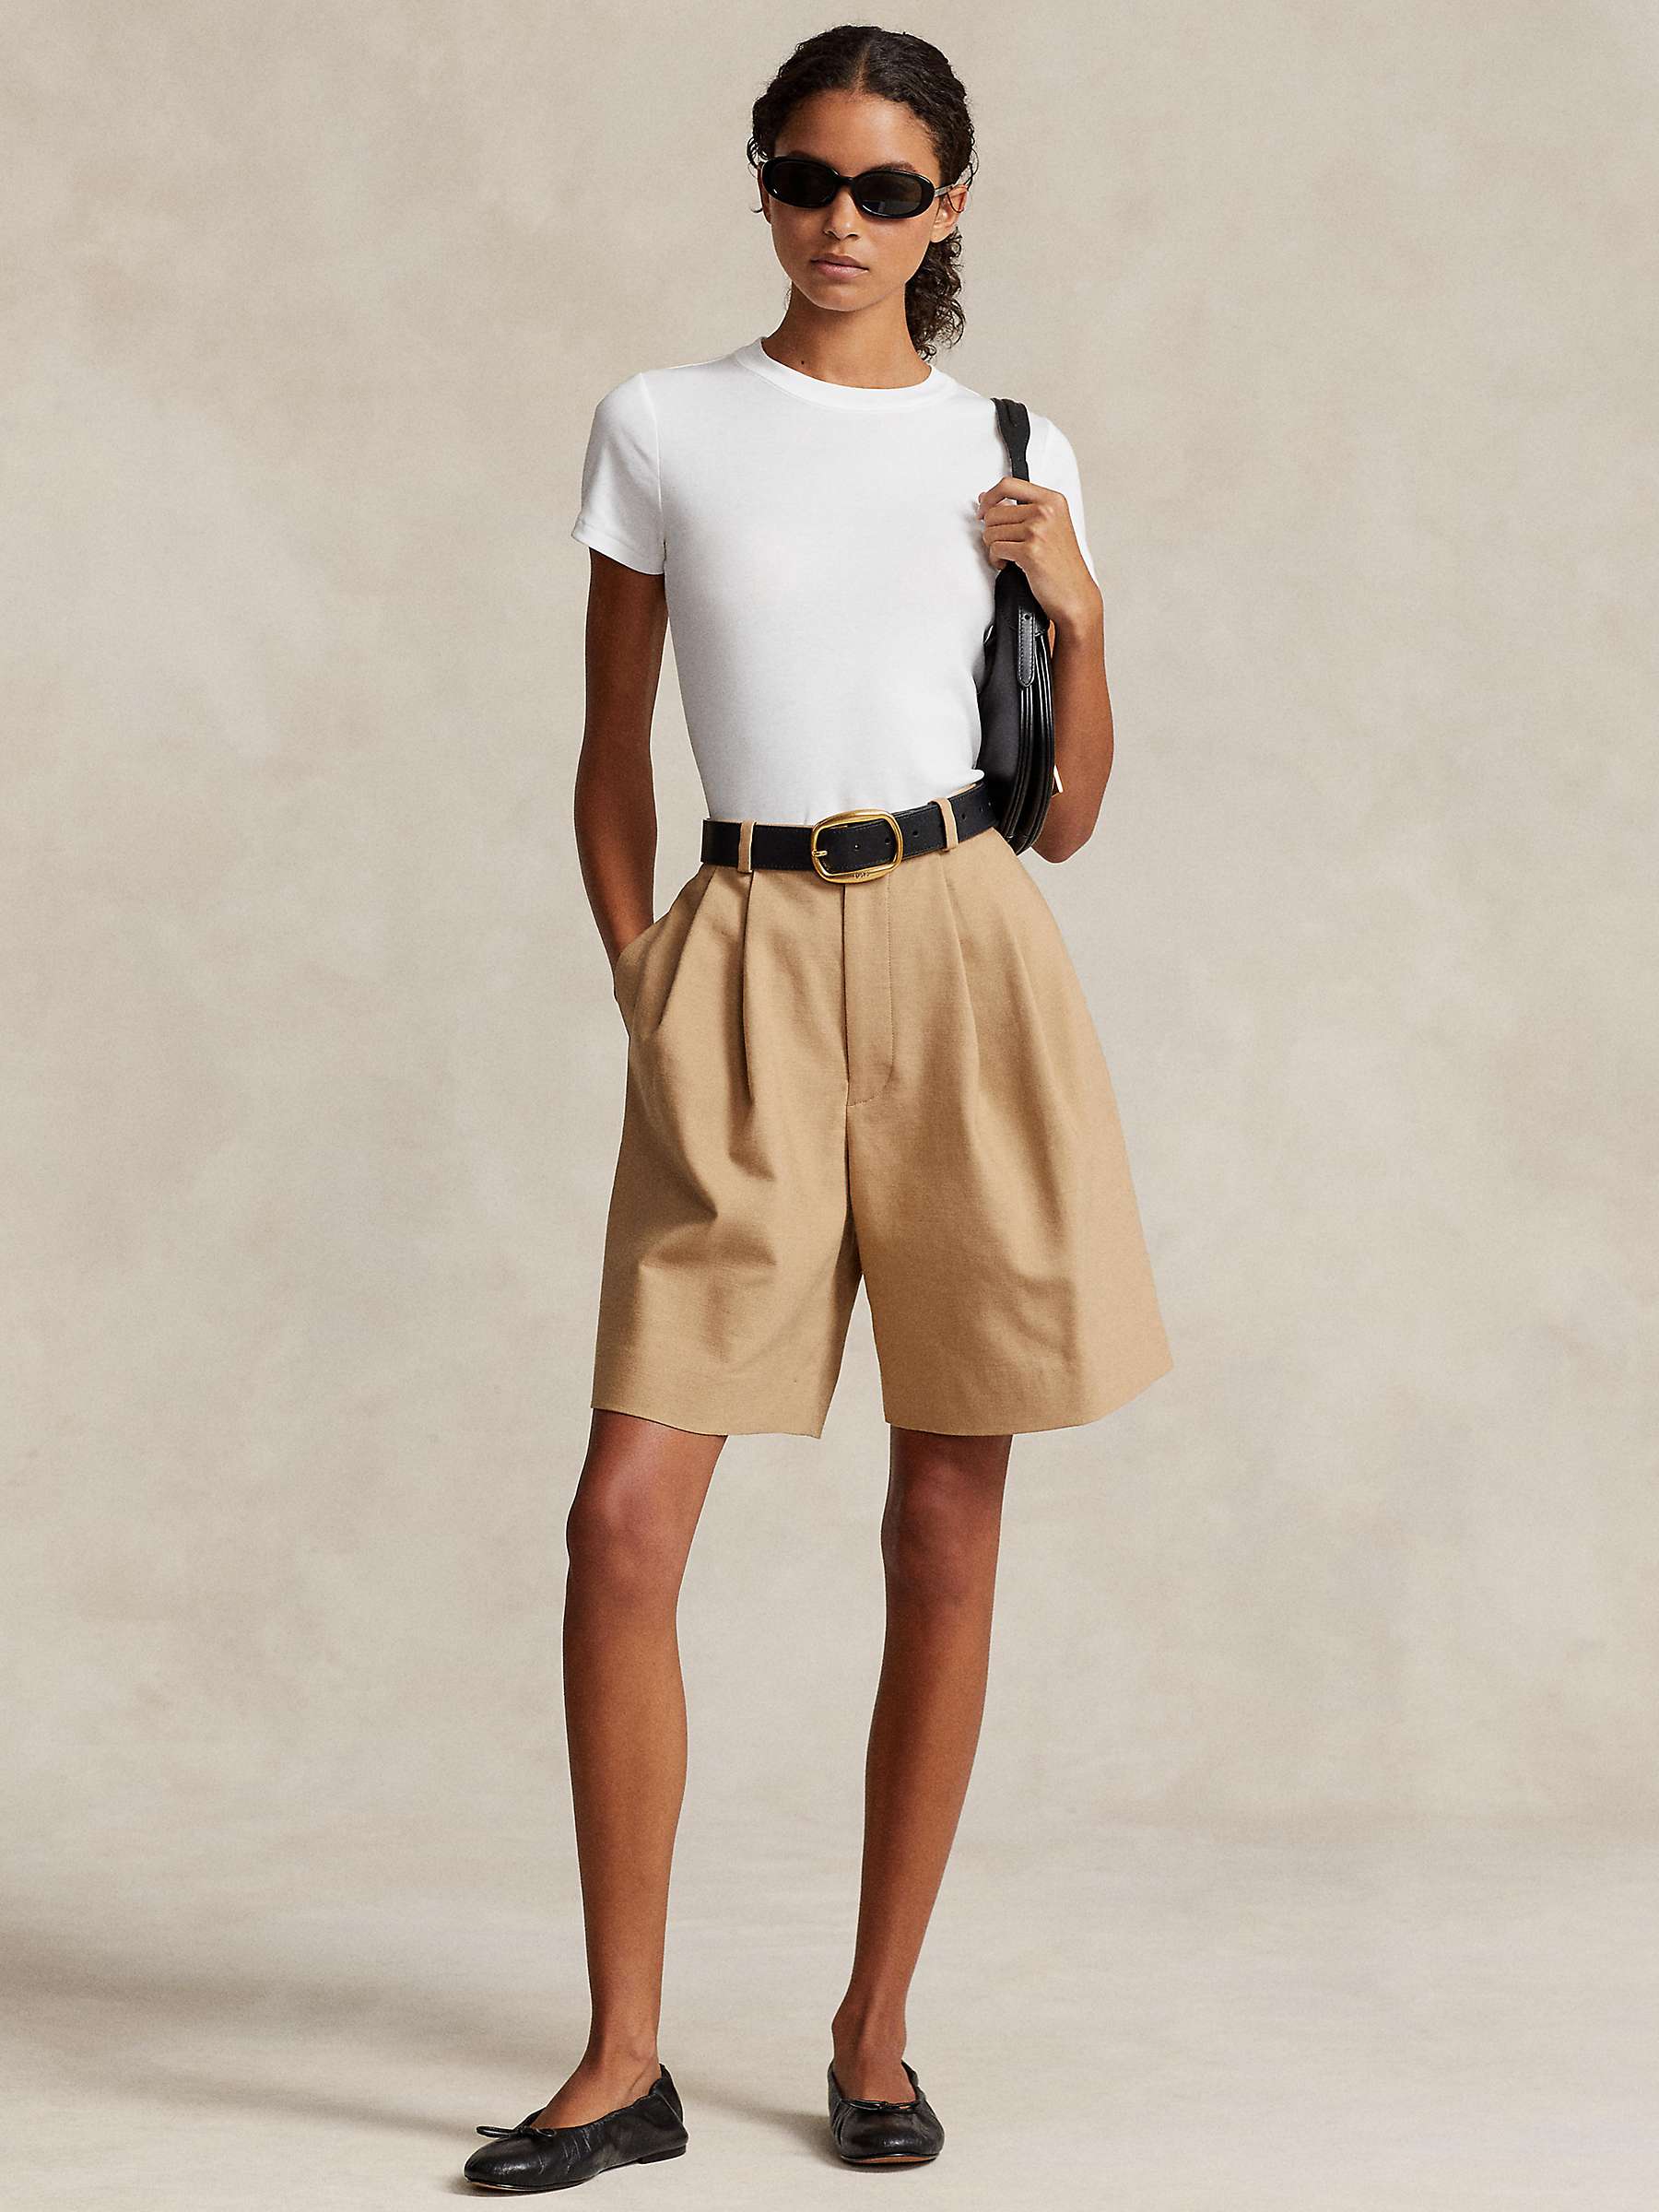 Buy Polo Ralph Lauren Pleated Shorts, Tan Online at johnlewis.com